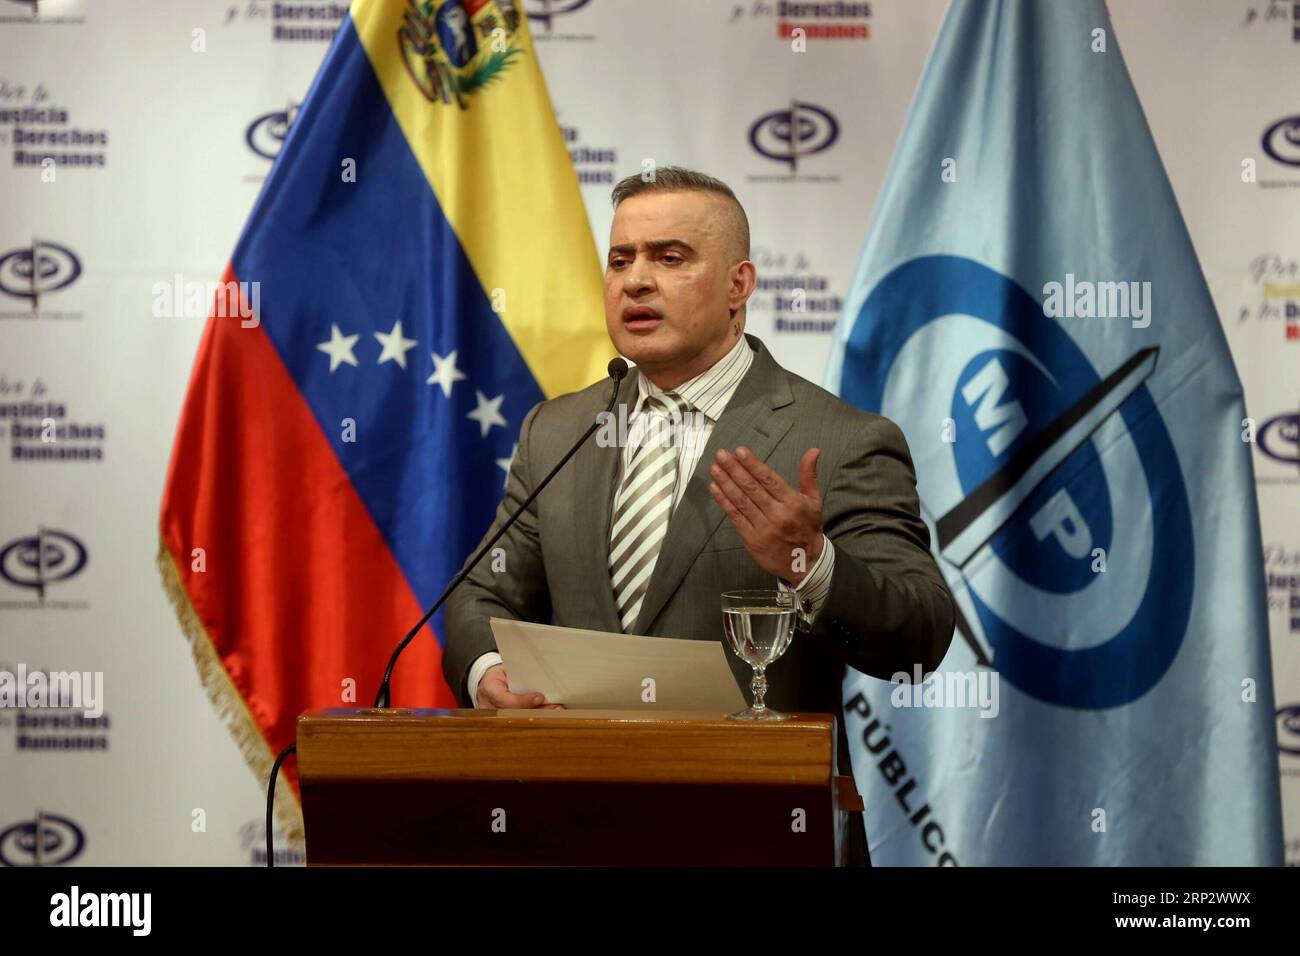 (180913) -- CARACAS, Sept. 13, 2018 -- Venezuela s attorney general Tarek William Saab speaks during a press conference on the progress of the fight against human trafficking at the Public Ministry headquarters, in Caracas, Venezuela, on Sept. 12, 2018. Venezuela has smashed a human trafficking ring that forced women into prostitution, the country s attorney general Tarek William Saab said on Wednesday. Juan Carlos La Cruz/AVN) (rtg) (vf)(dtf) VENEZUELA-CARACAS-TAREK WILLIAM SAAB e AVN PUBLICATIONxNOTxINxCHN Stock Photo